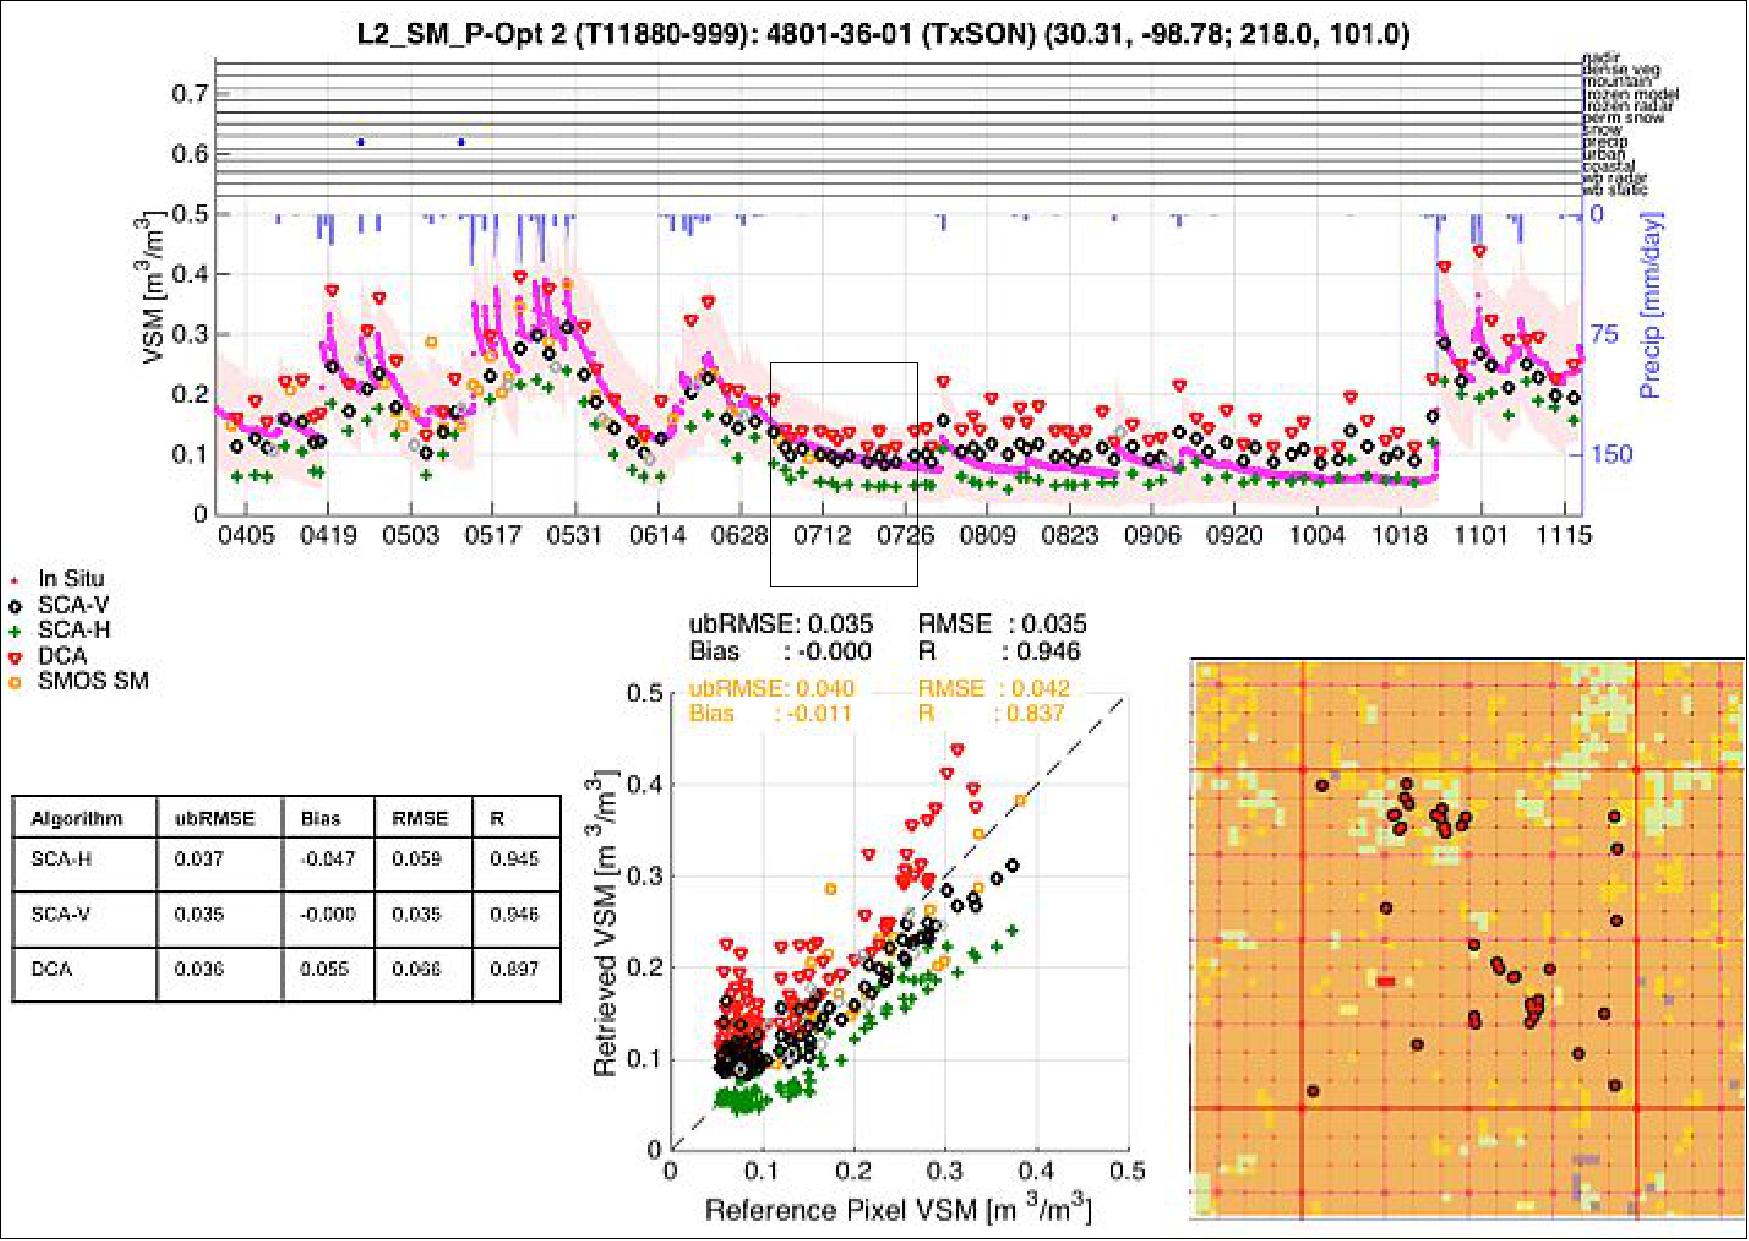 Figure 28: Comparison with the in situ data from the TxSON Cal/Val site. The upper panel illustrates the time series comparison. The bottom right indicates the locations of in situ sensors in the 36 km grid. The bottom middle indicates the scatter plot of satellite retrieved VSM (Volumetric Soil Moisture) and reference (in situ) VSM. The statistics of differences is provided in the bottom left panel for Single Channel Algorithm H-pol (SCA-H), Single Channel V-pol (SCA-V) and DCA (Dual Channel Algorithm). Soil moisture results from SMOS are also shown (image credit: NASA/JPL)